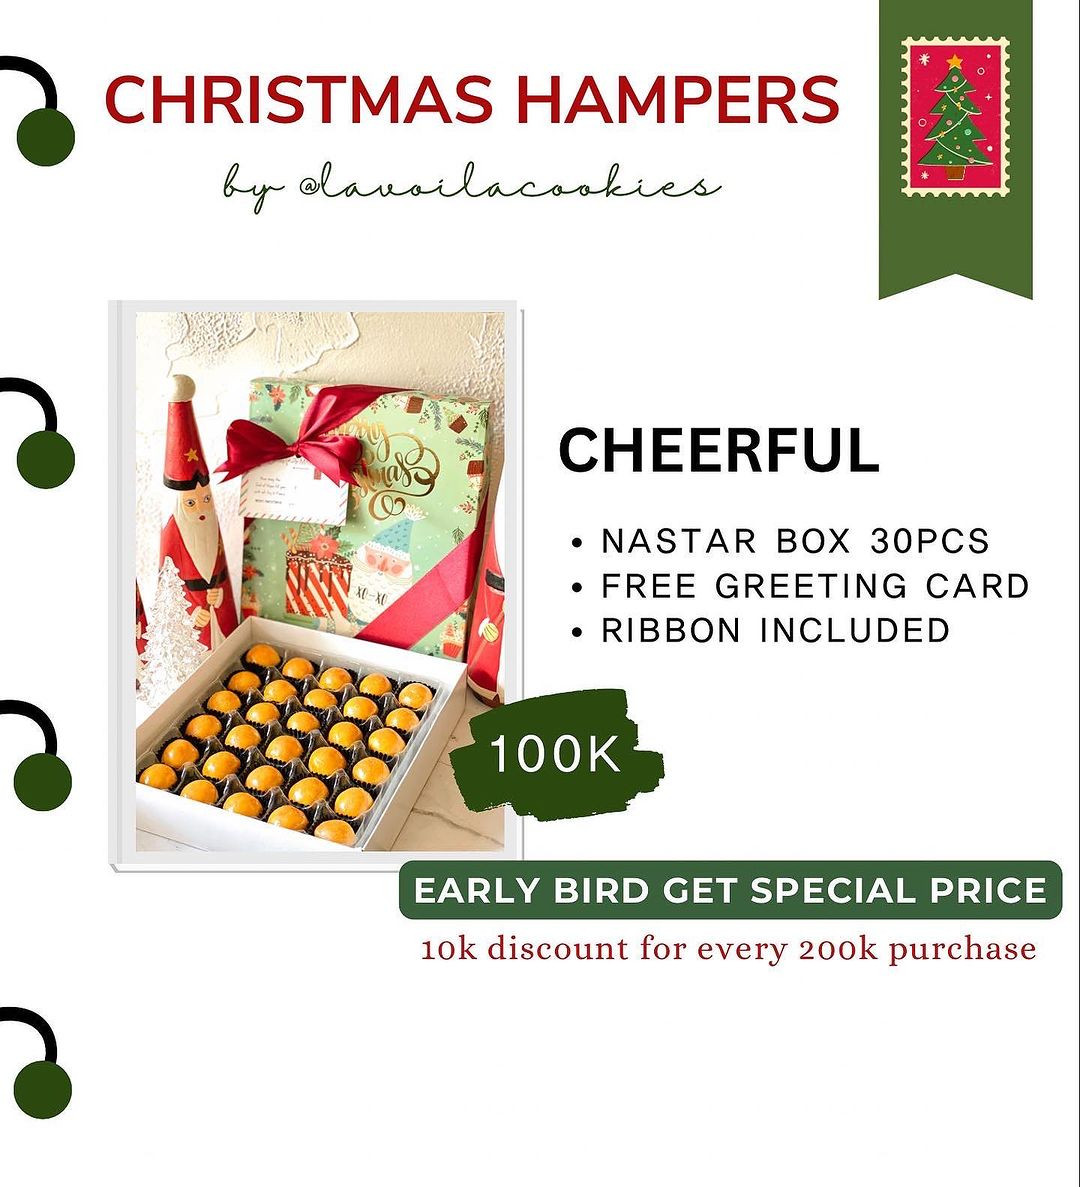 Cheerful Hampers